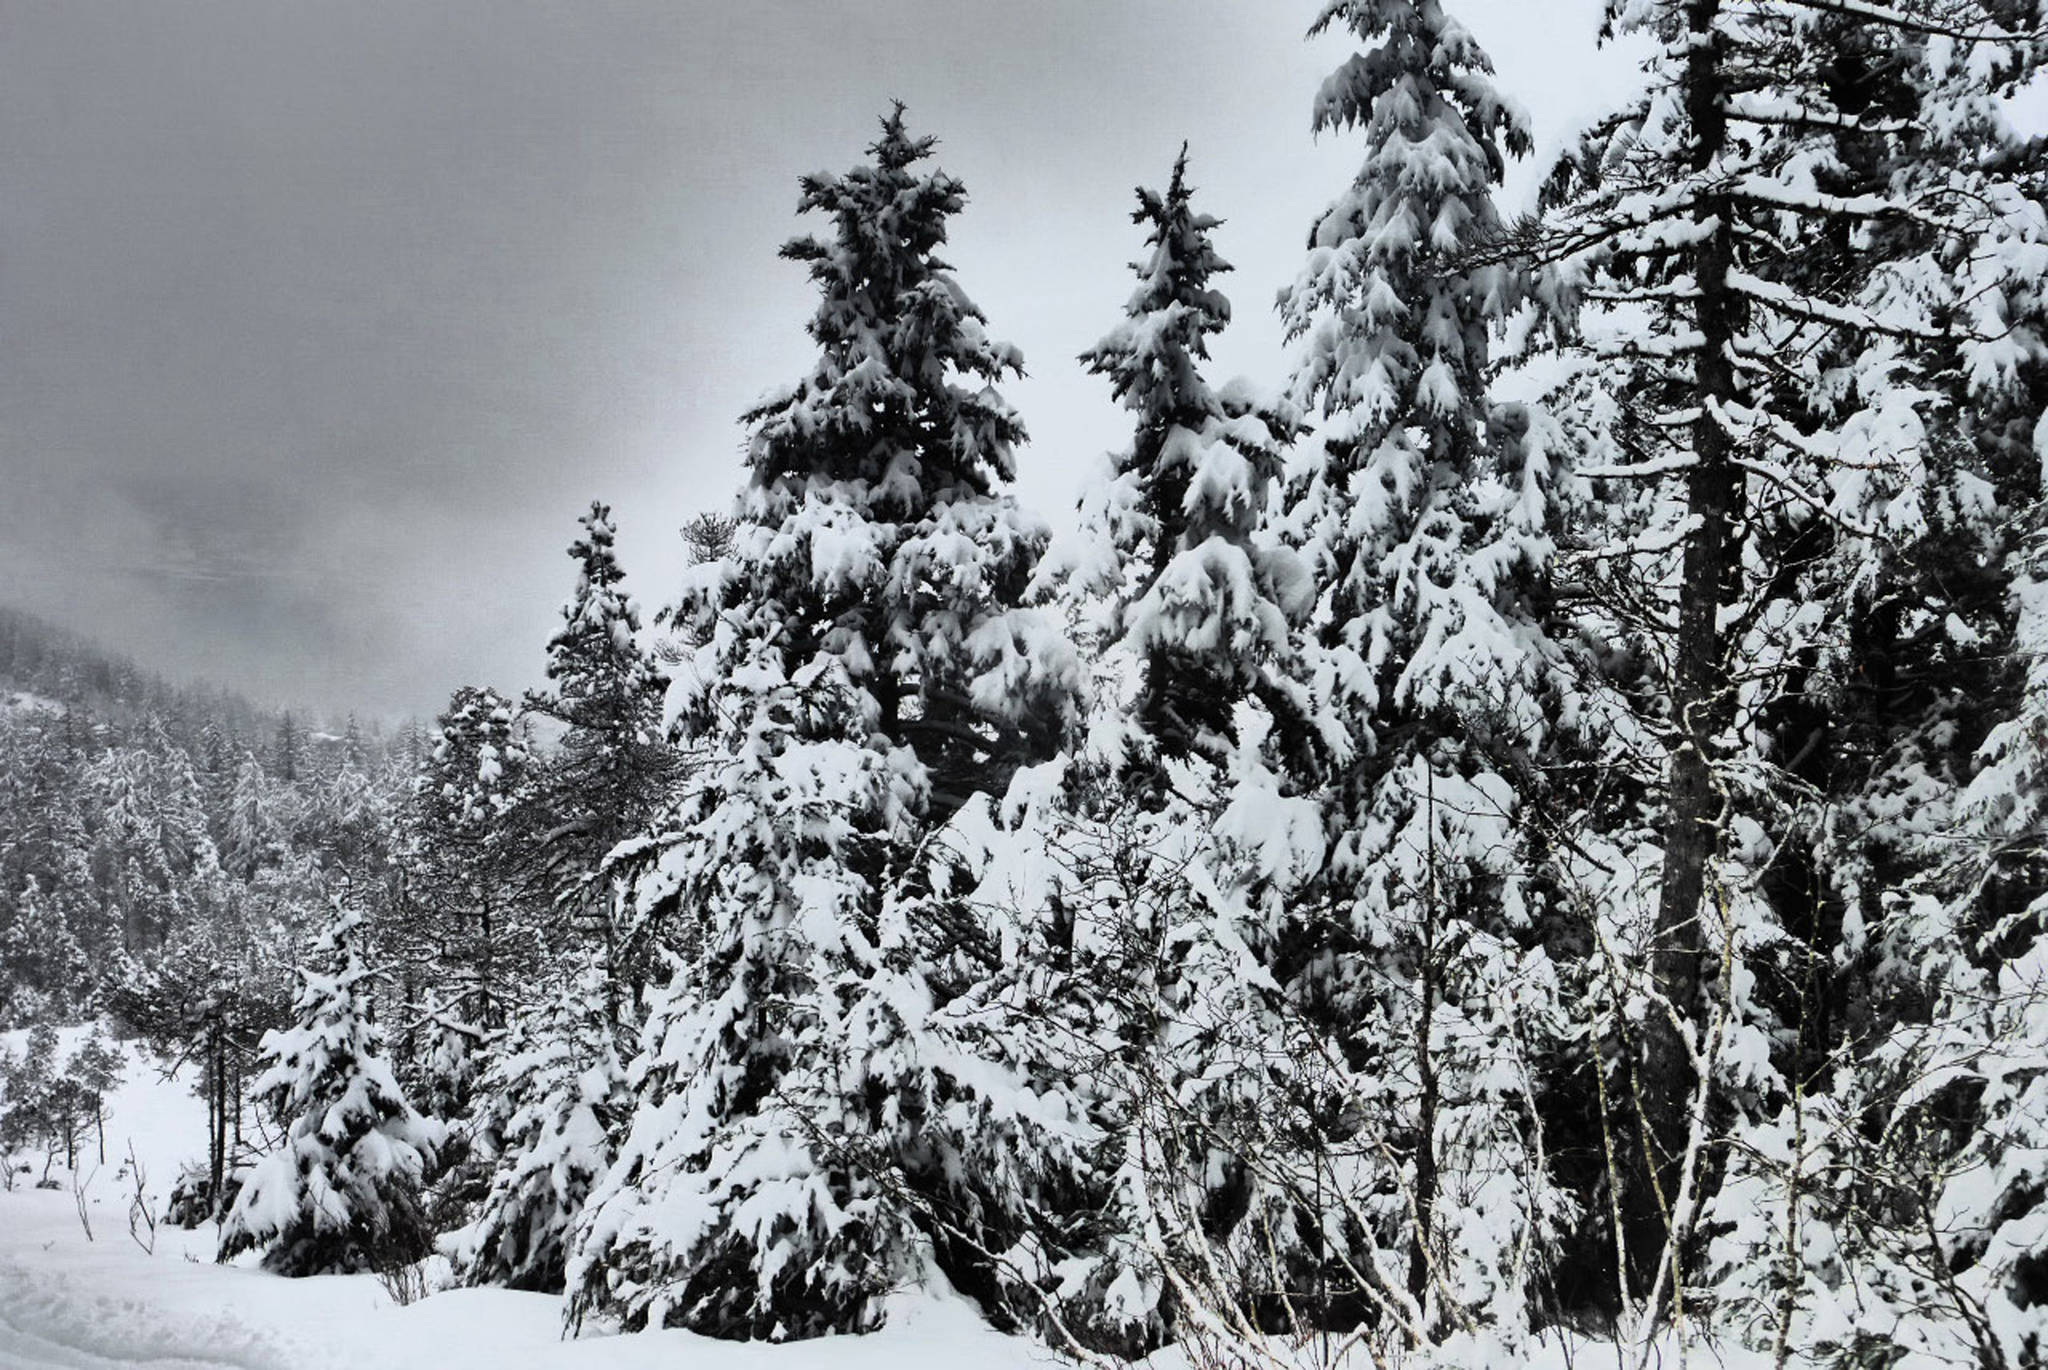 A stand of evergreens in a winter wonderland along Treadwell Ditch Trail on Jan. 11, 2019. (Courtesy Photo | Denise Carroll)